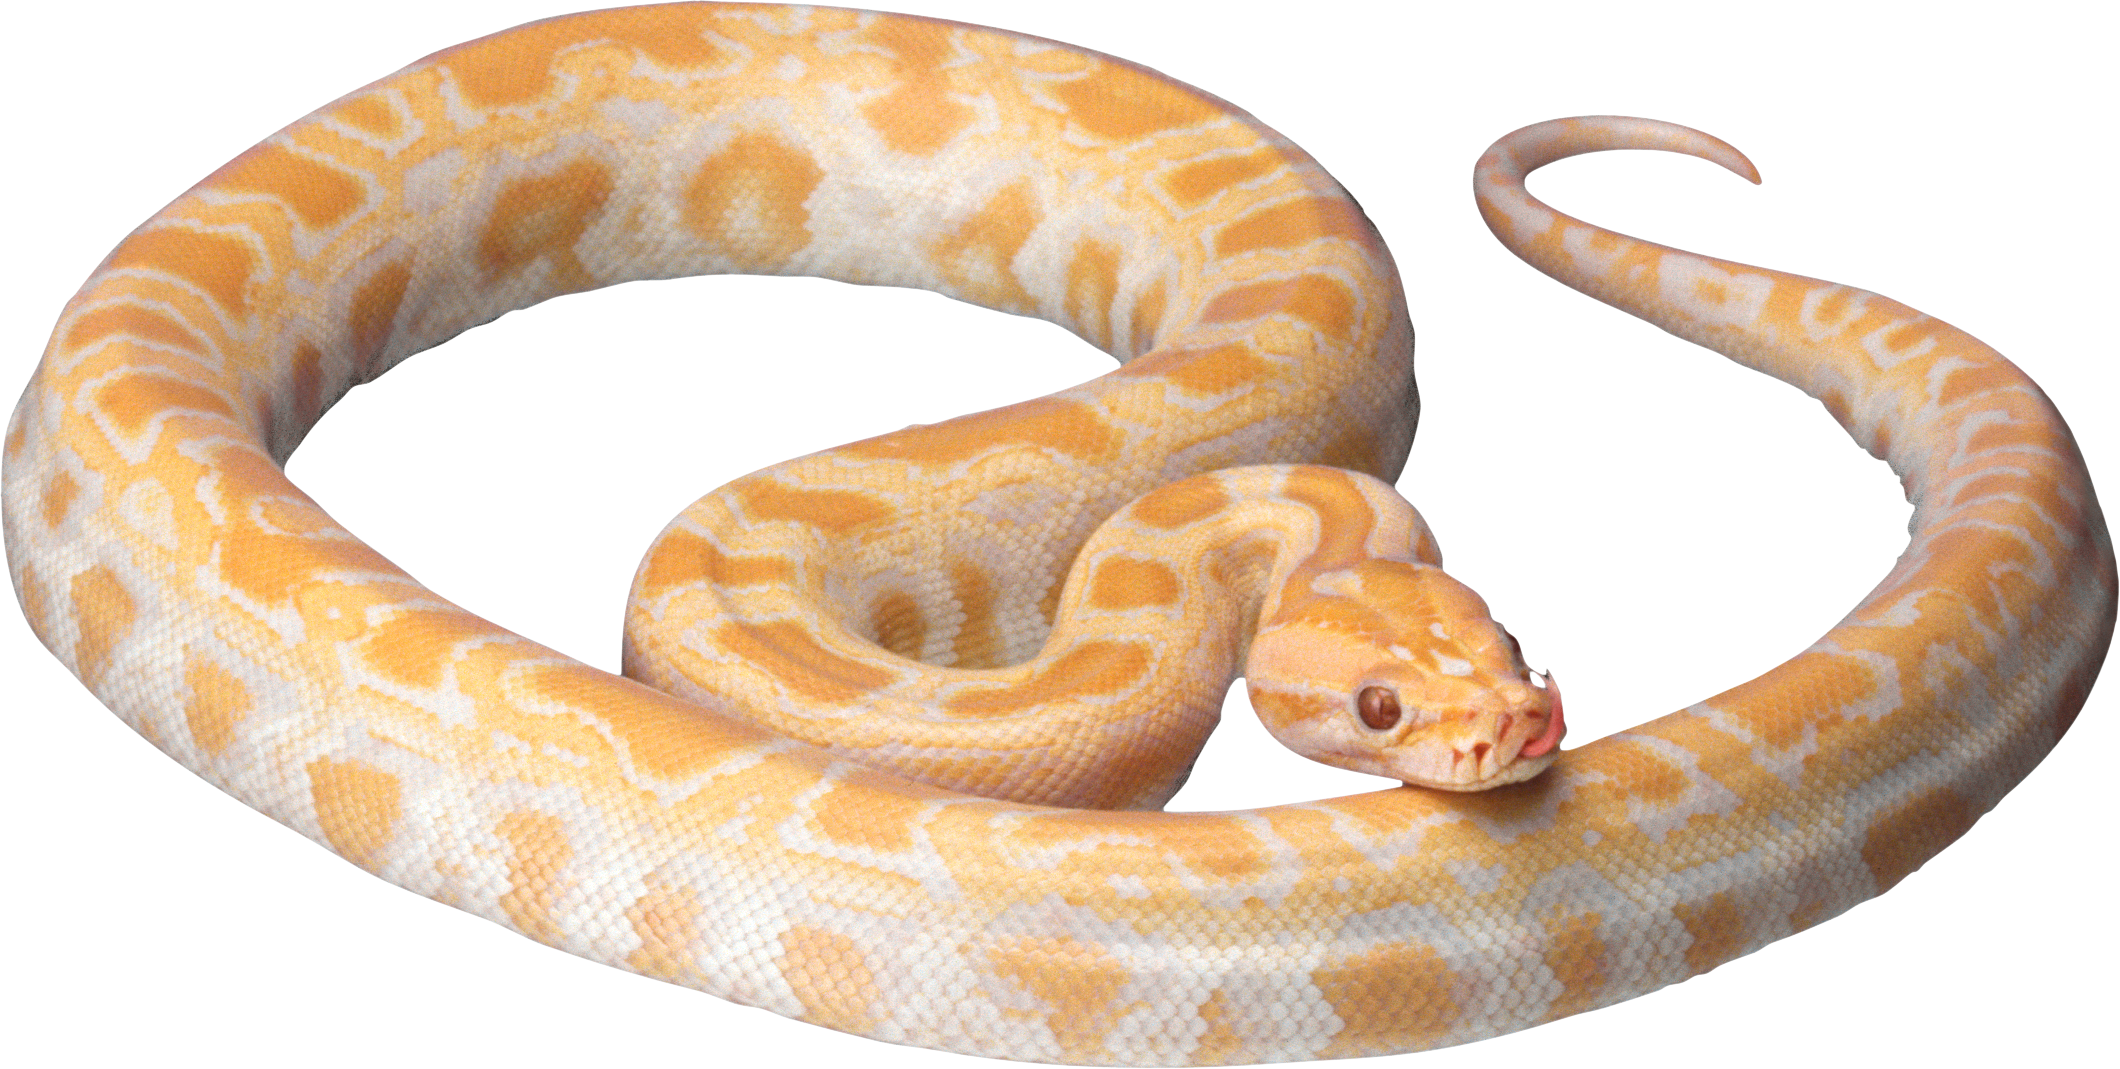 White Snake Png Image Picture Download Free - Transparent Snake - HD Wallpaper 